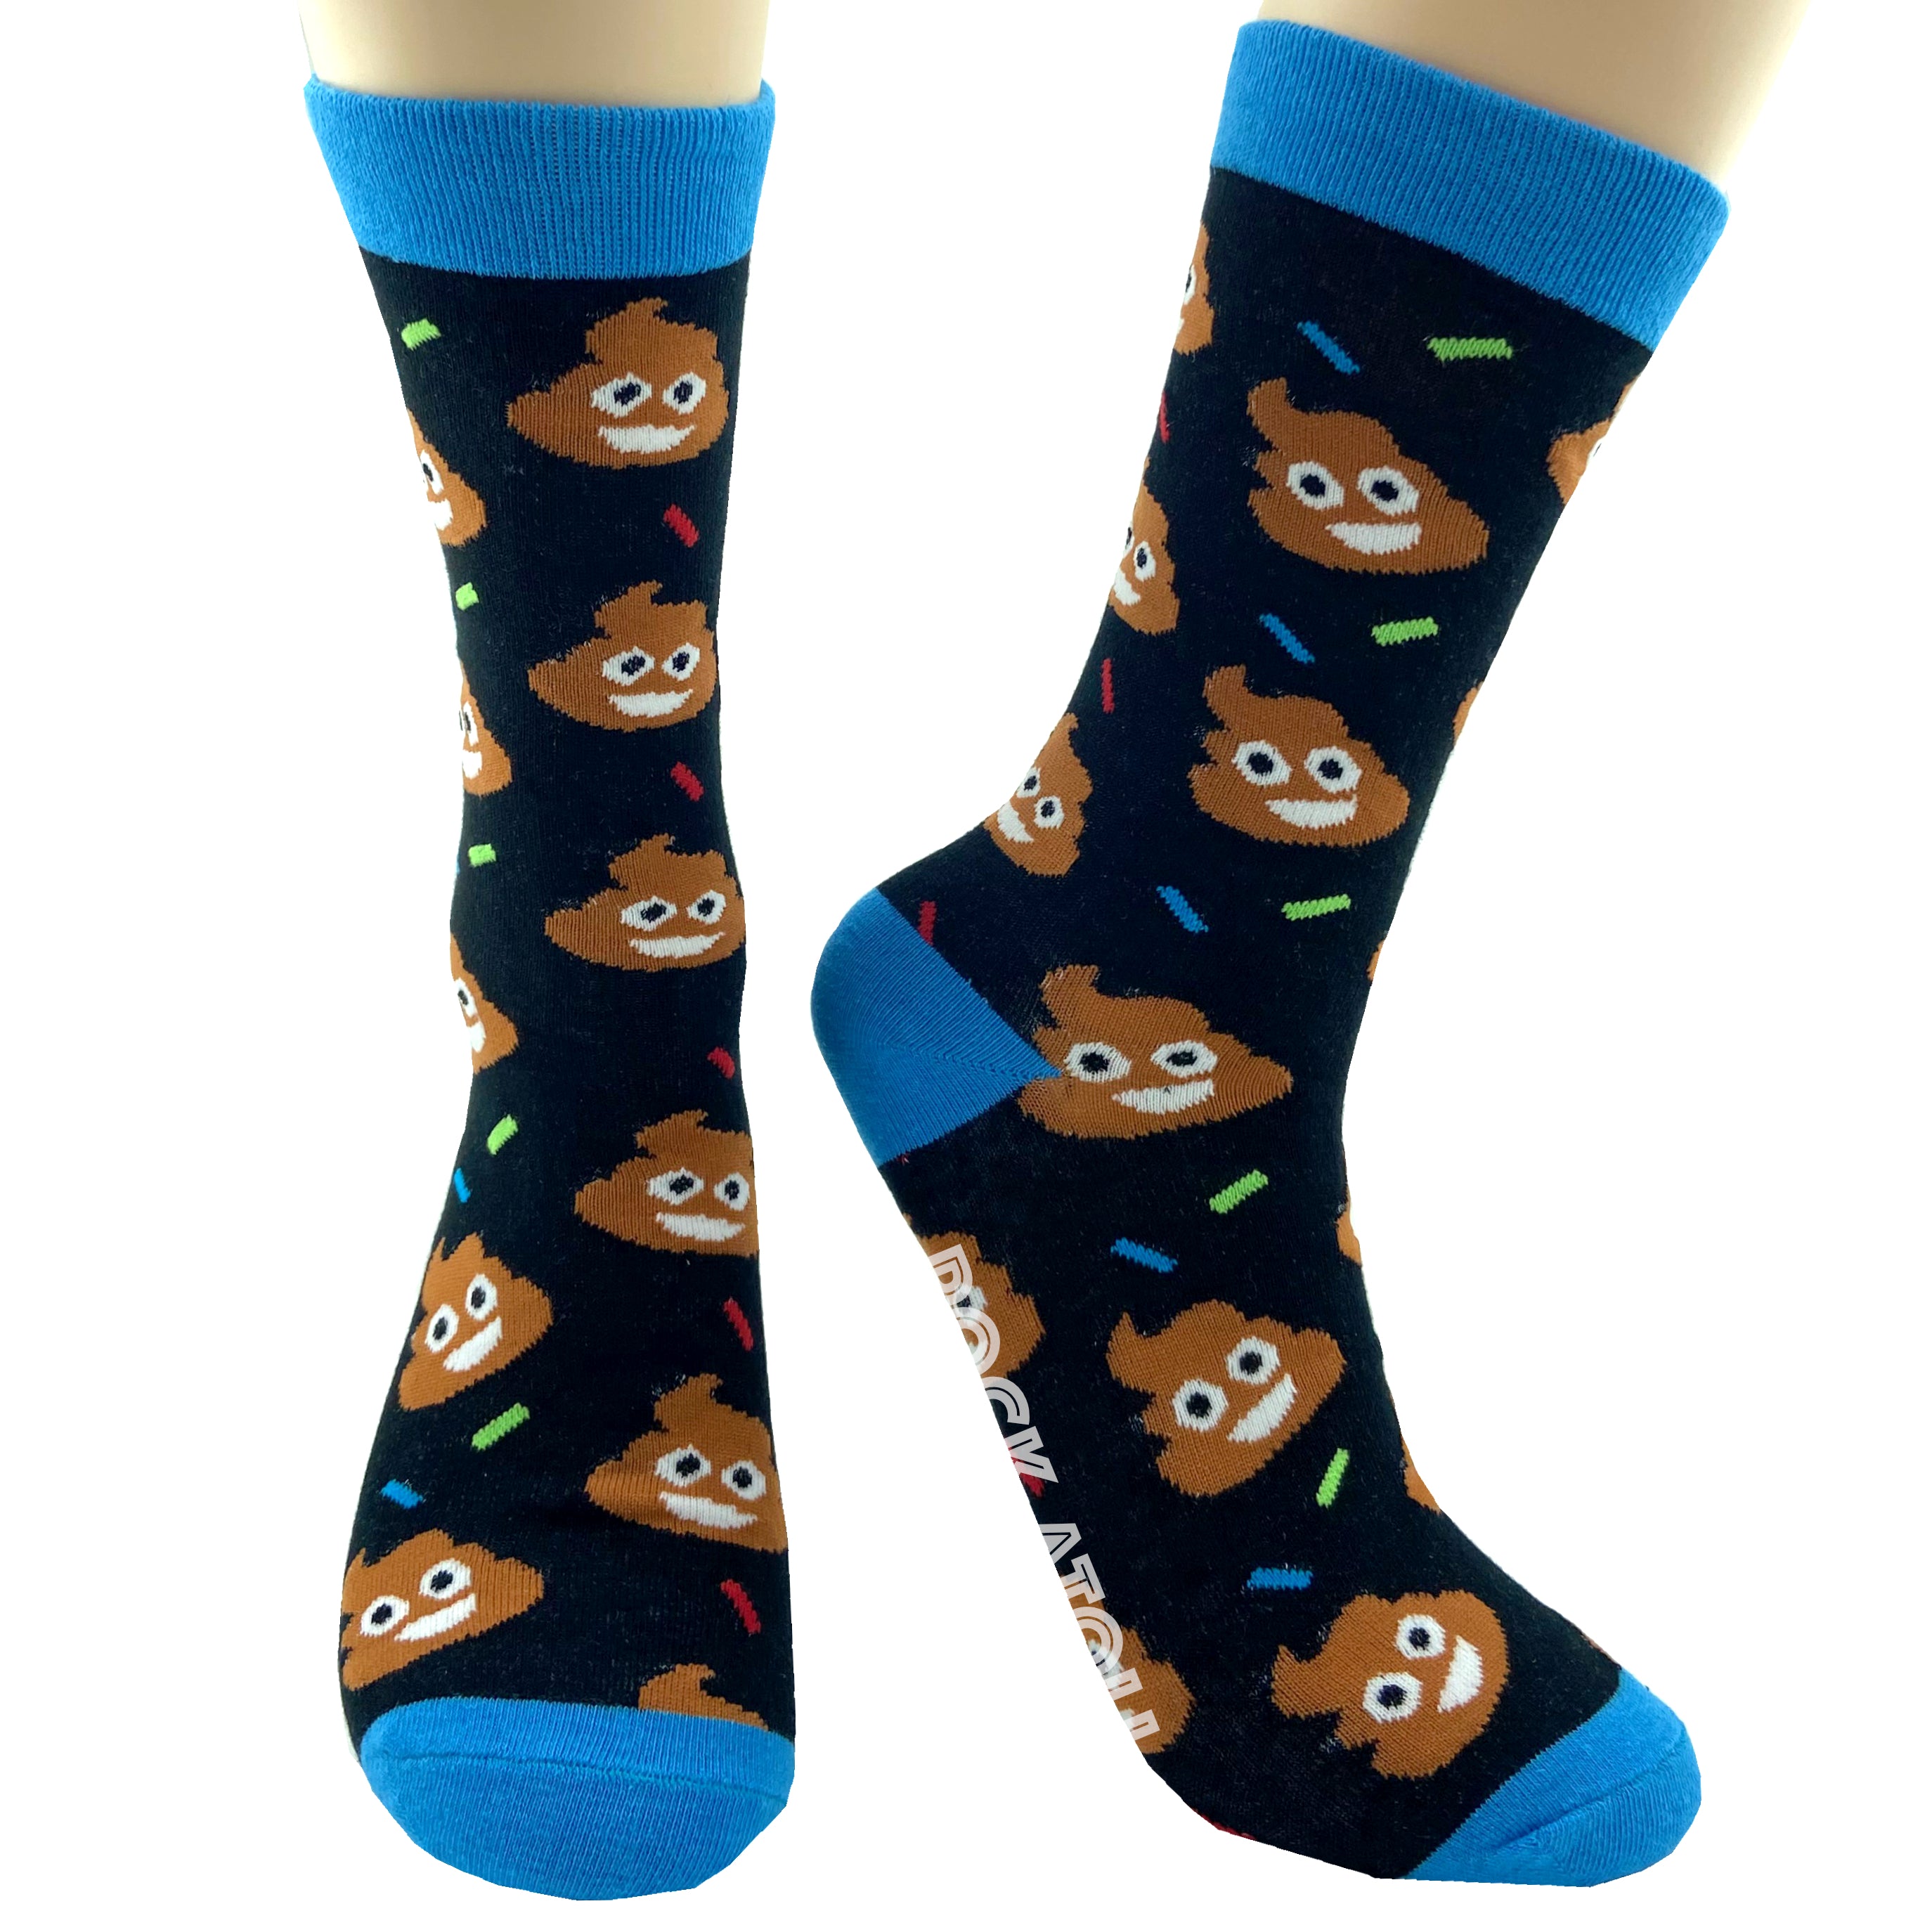 Festive Smiley Poop All Over Print Silly Funny Novelty Crew Socks